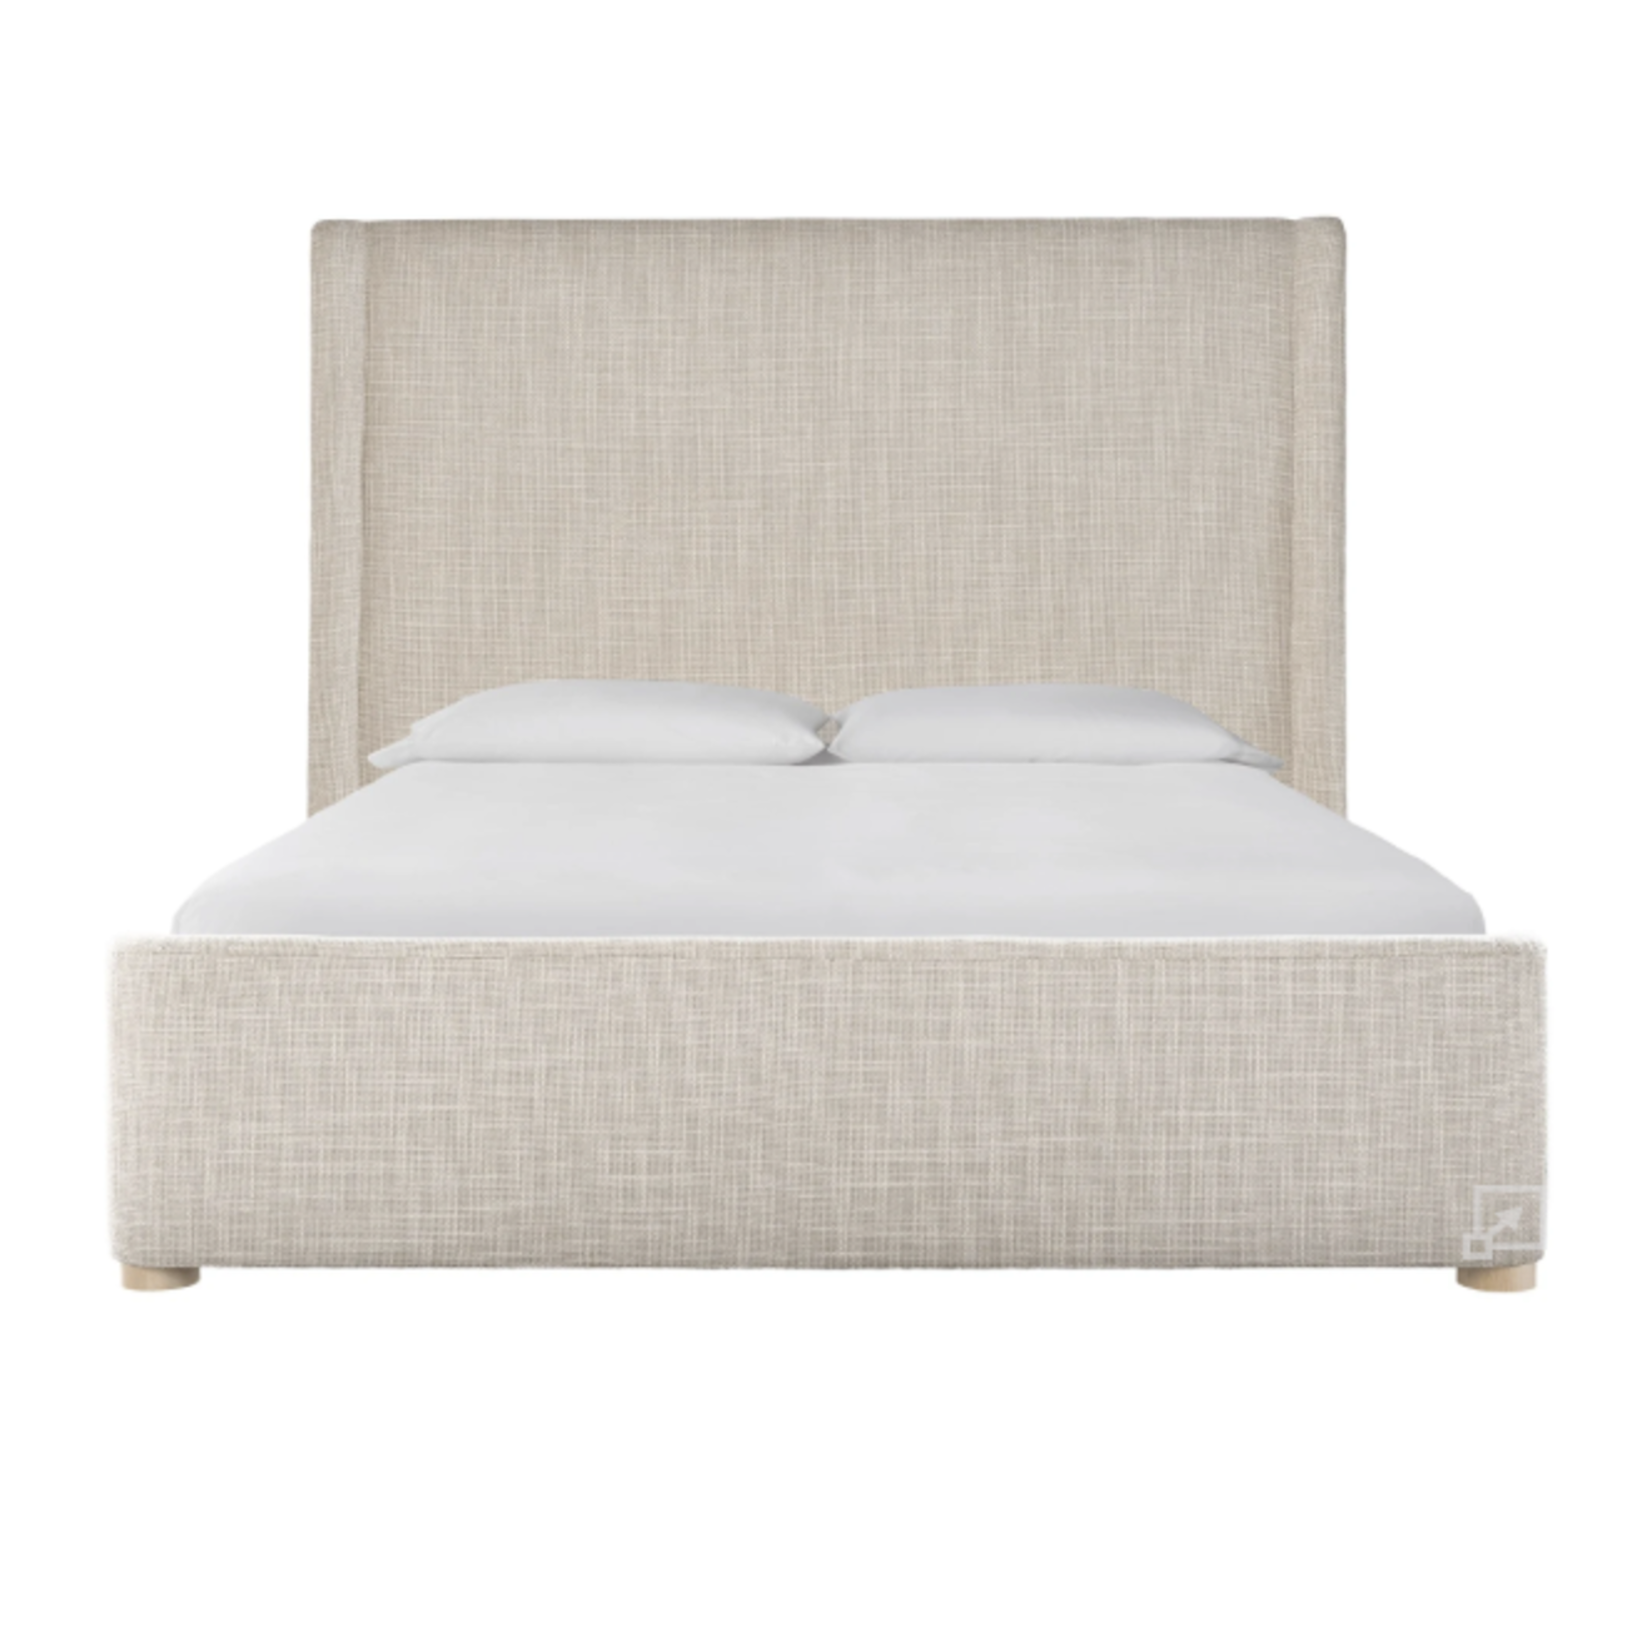 Outside The Box 65x88x62 Daybreak Solaz Sand Performance Upholstered Queen Bed